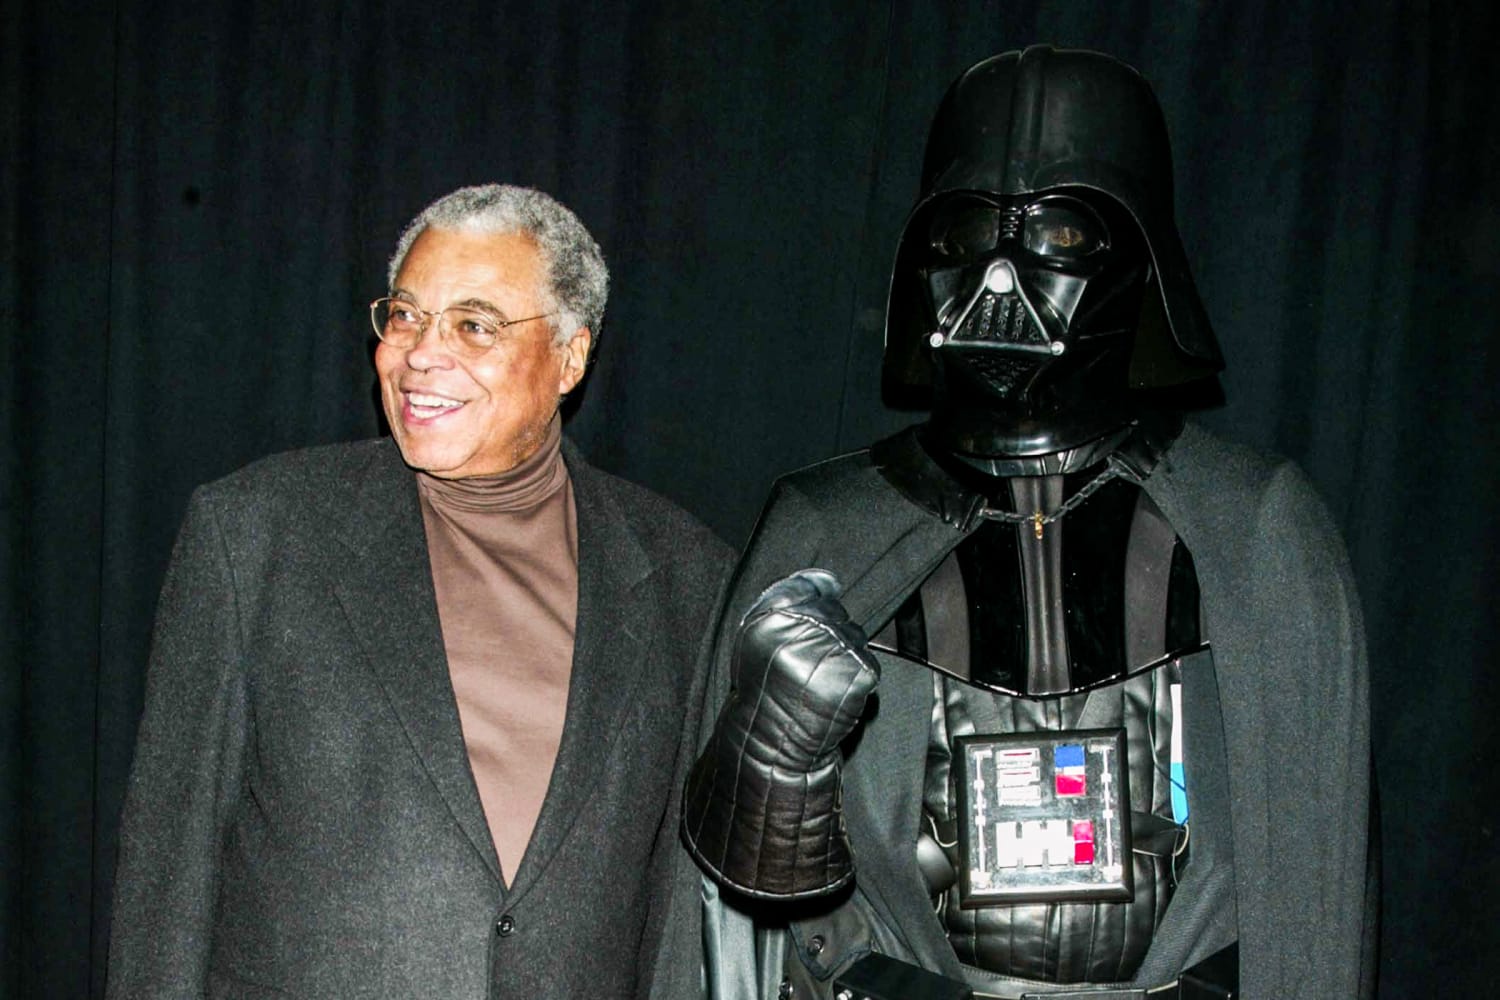 James Earl Jones approves using his archived recordings to recreate Darth Vader’s voice with A.I.